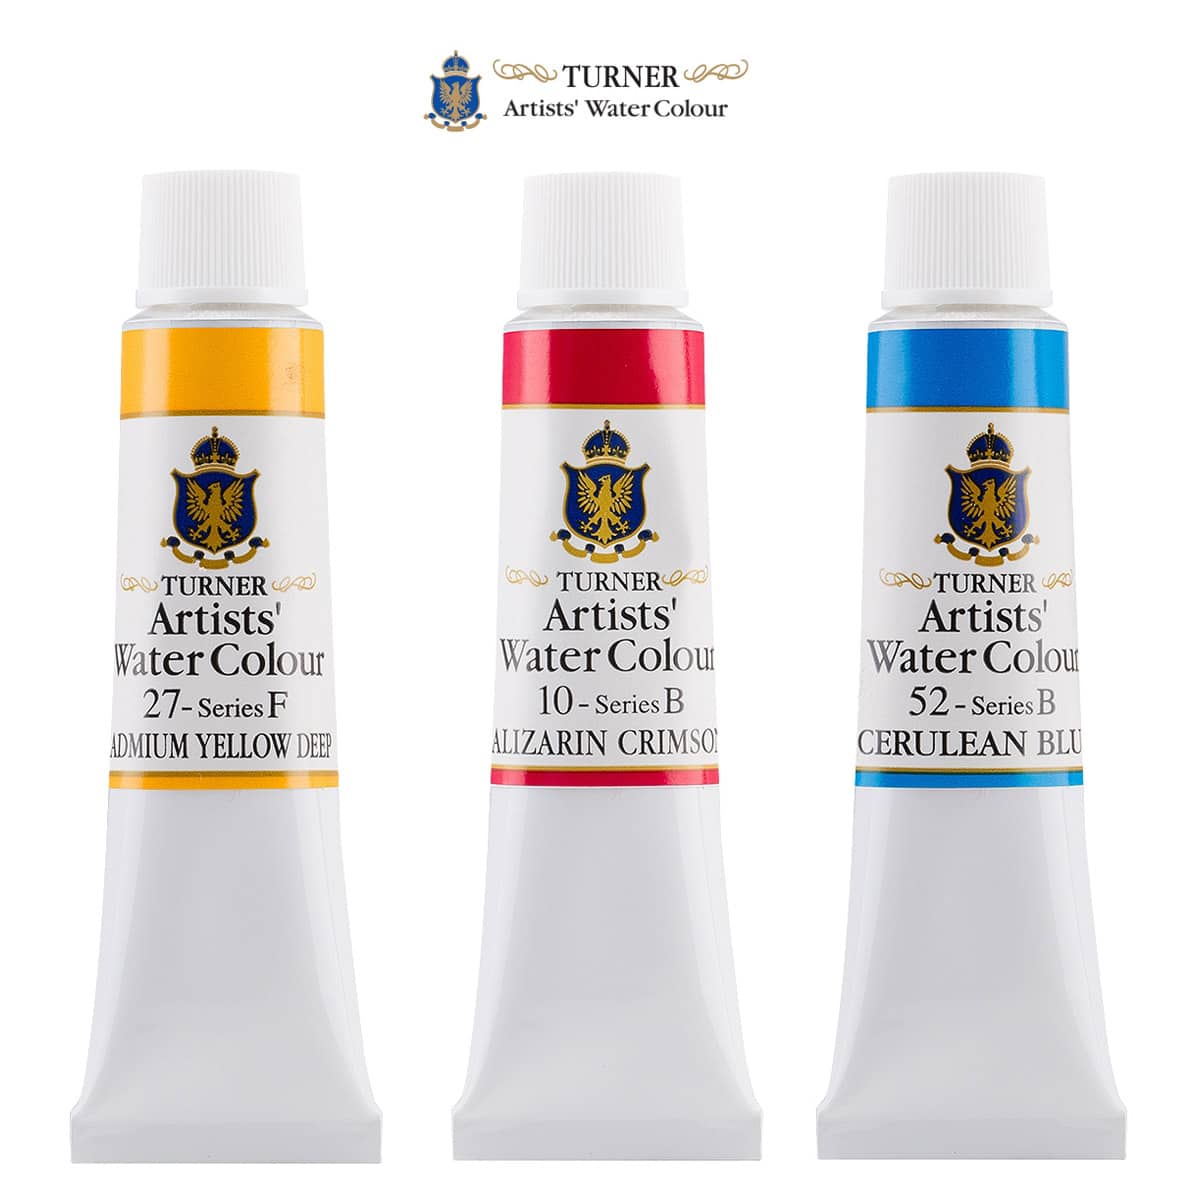 Turner concentrated watercolor paints